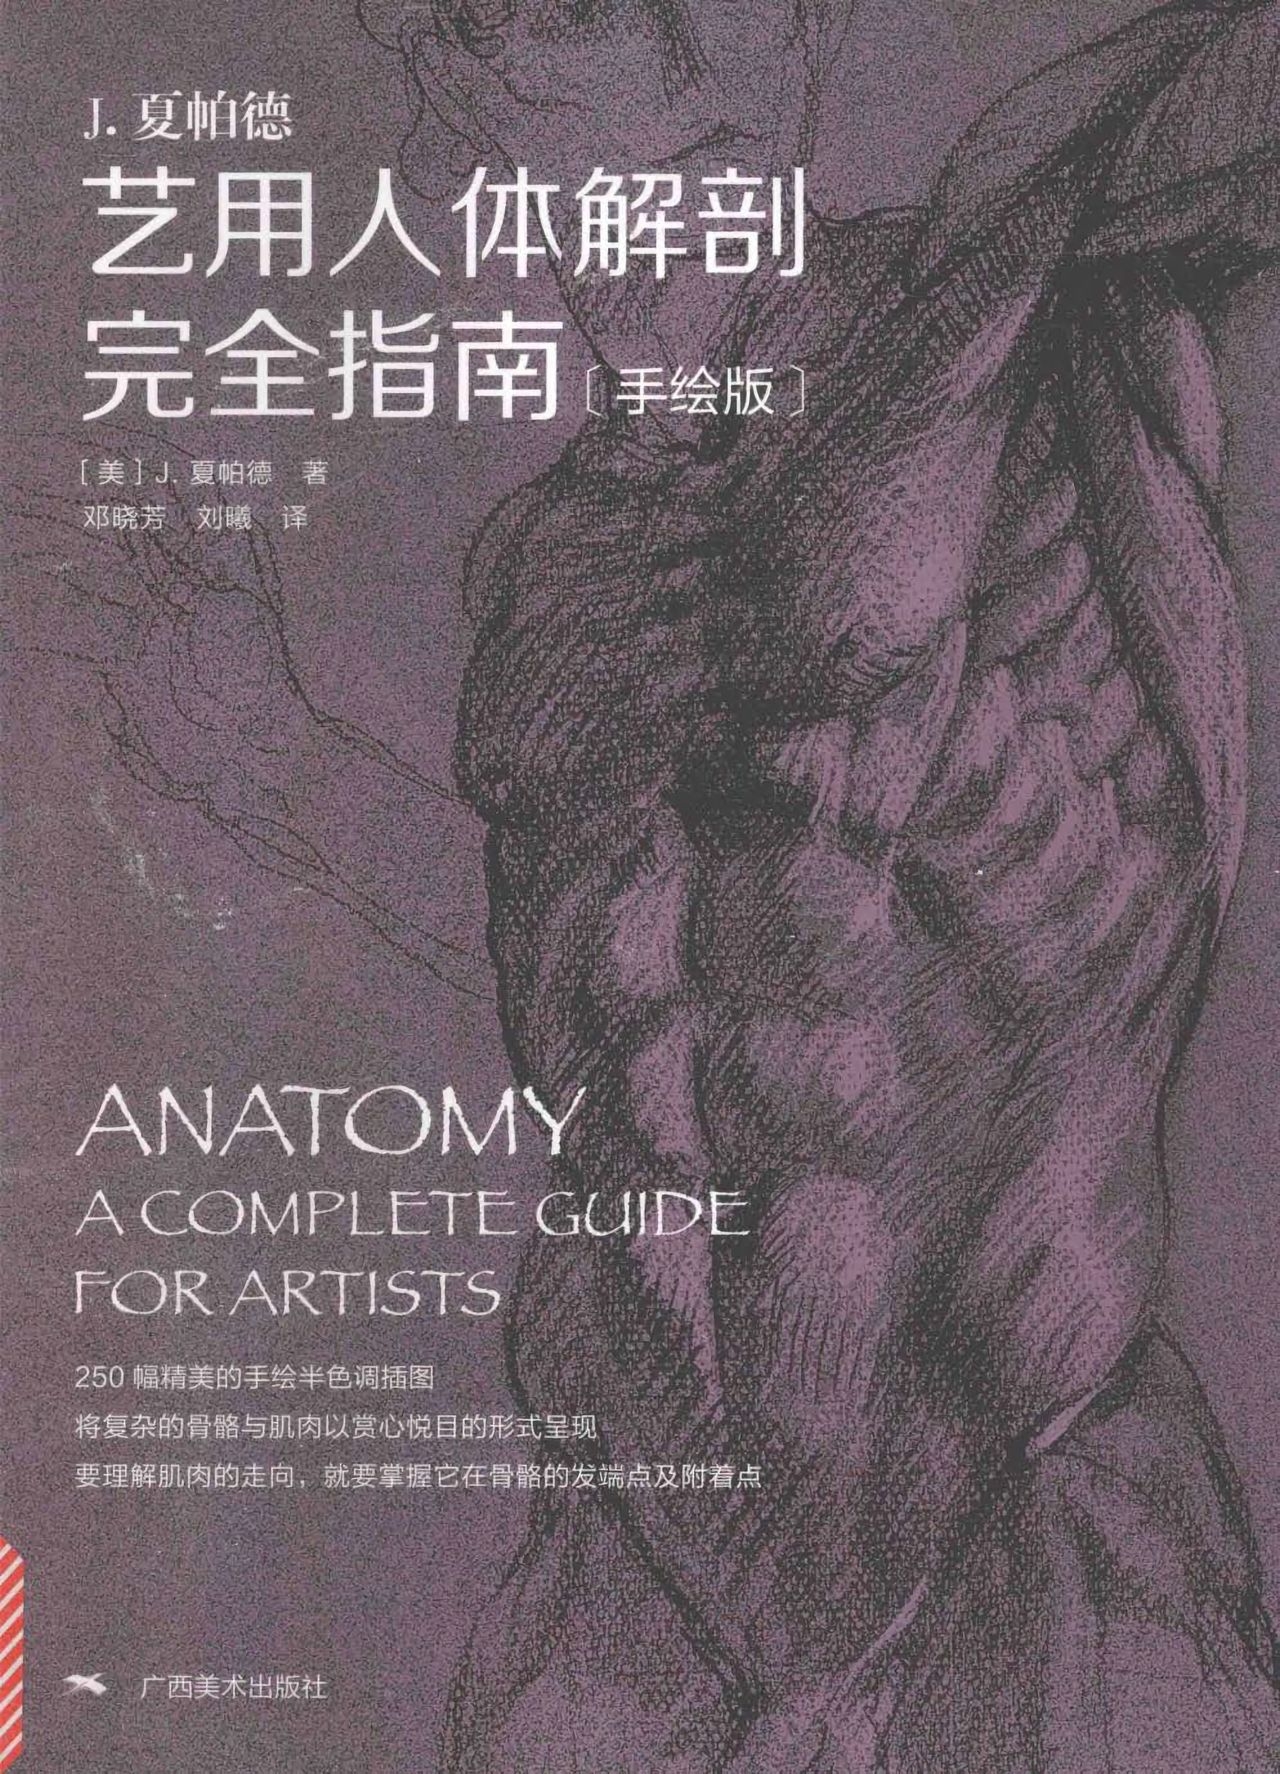 Anatomy-A Complete Guide for Artists - Joseph Sheppard [Chinese] 0